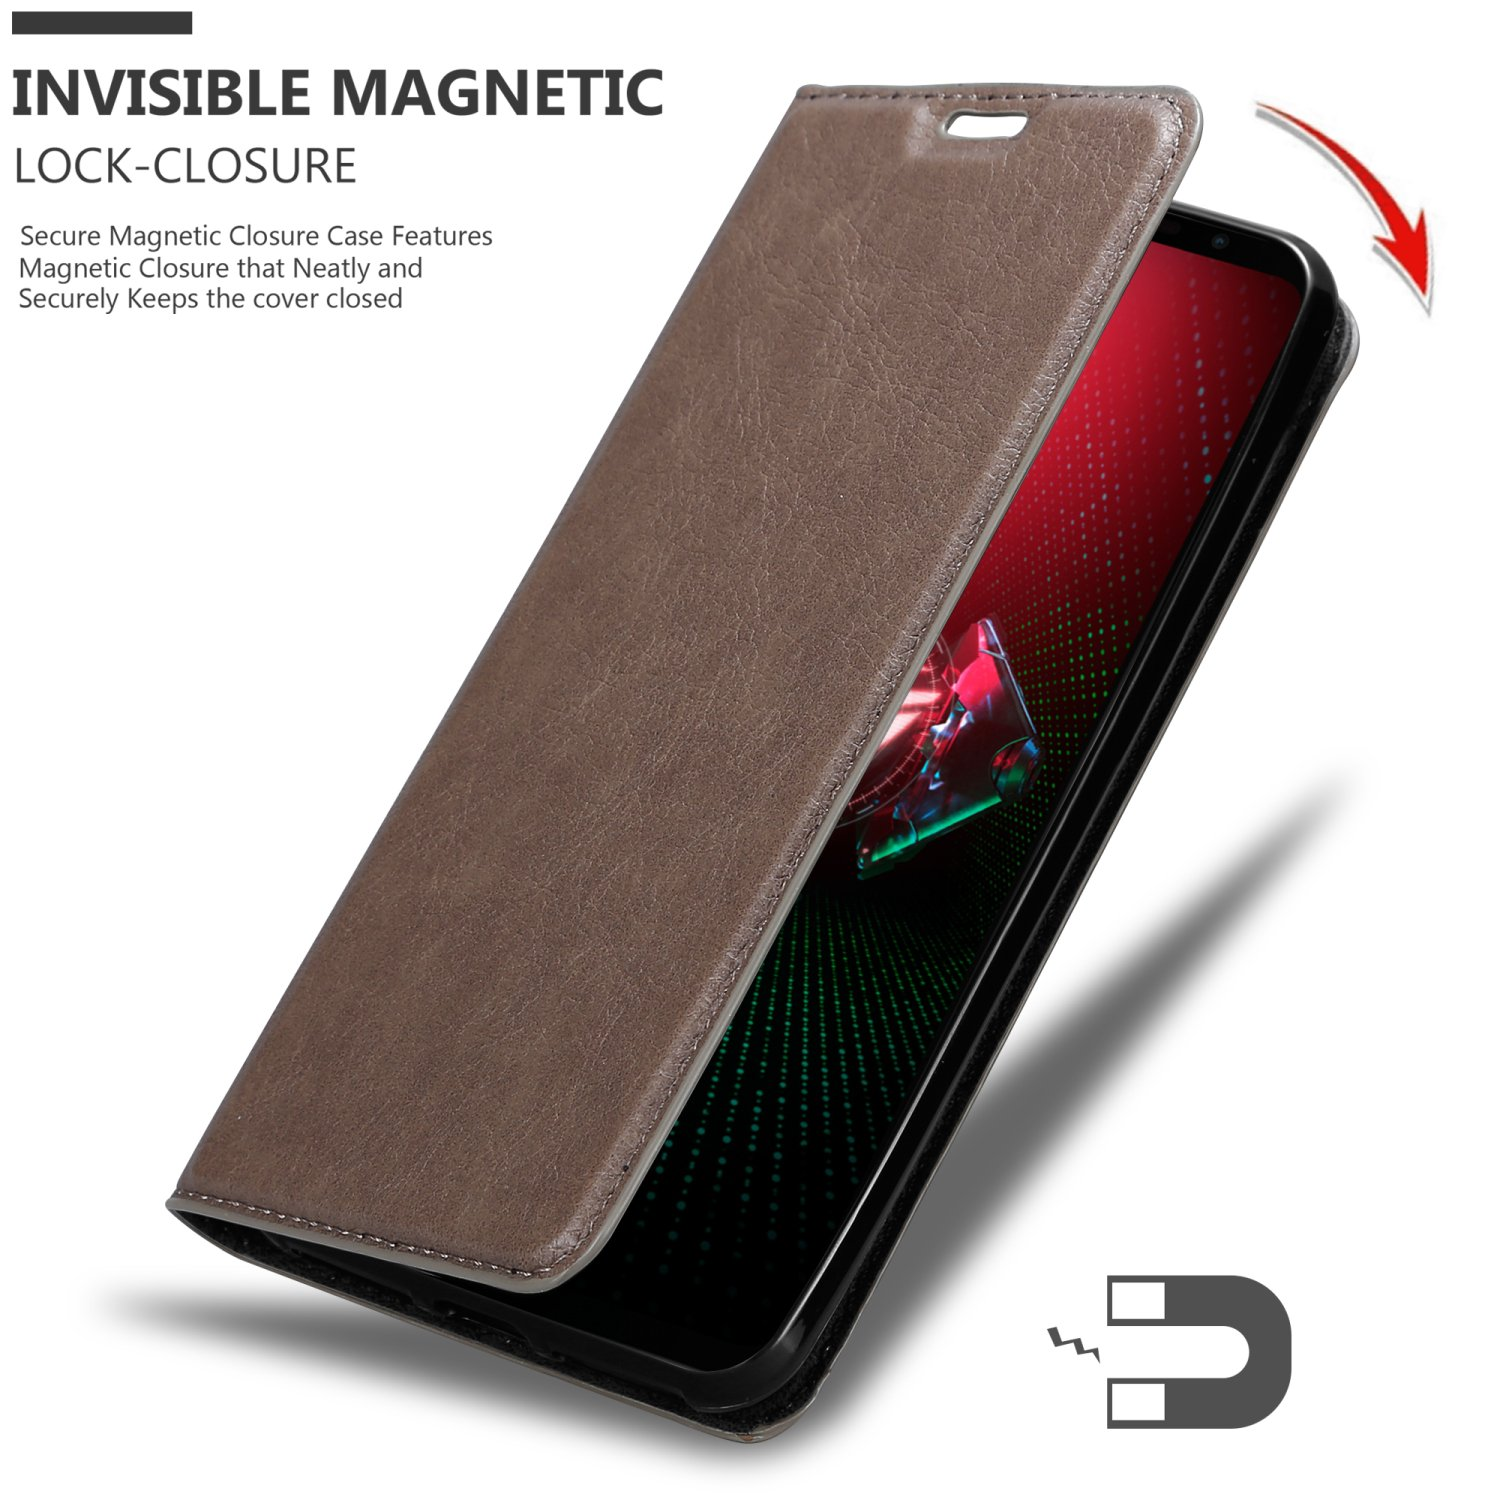 CADORABO Book Magnet, BRAUN KAFFEE Invisible Bookcover, Phone ROG Asus, 5, Hülle